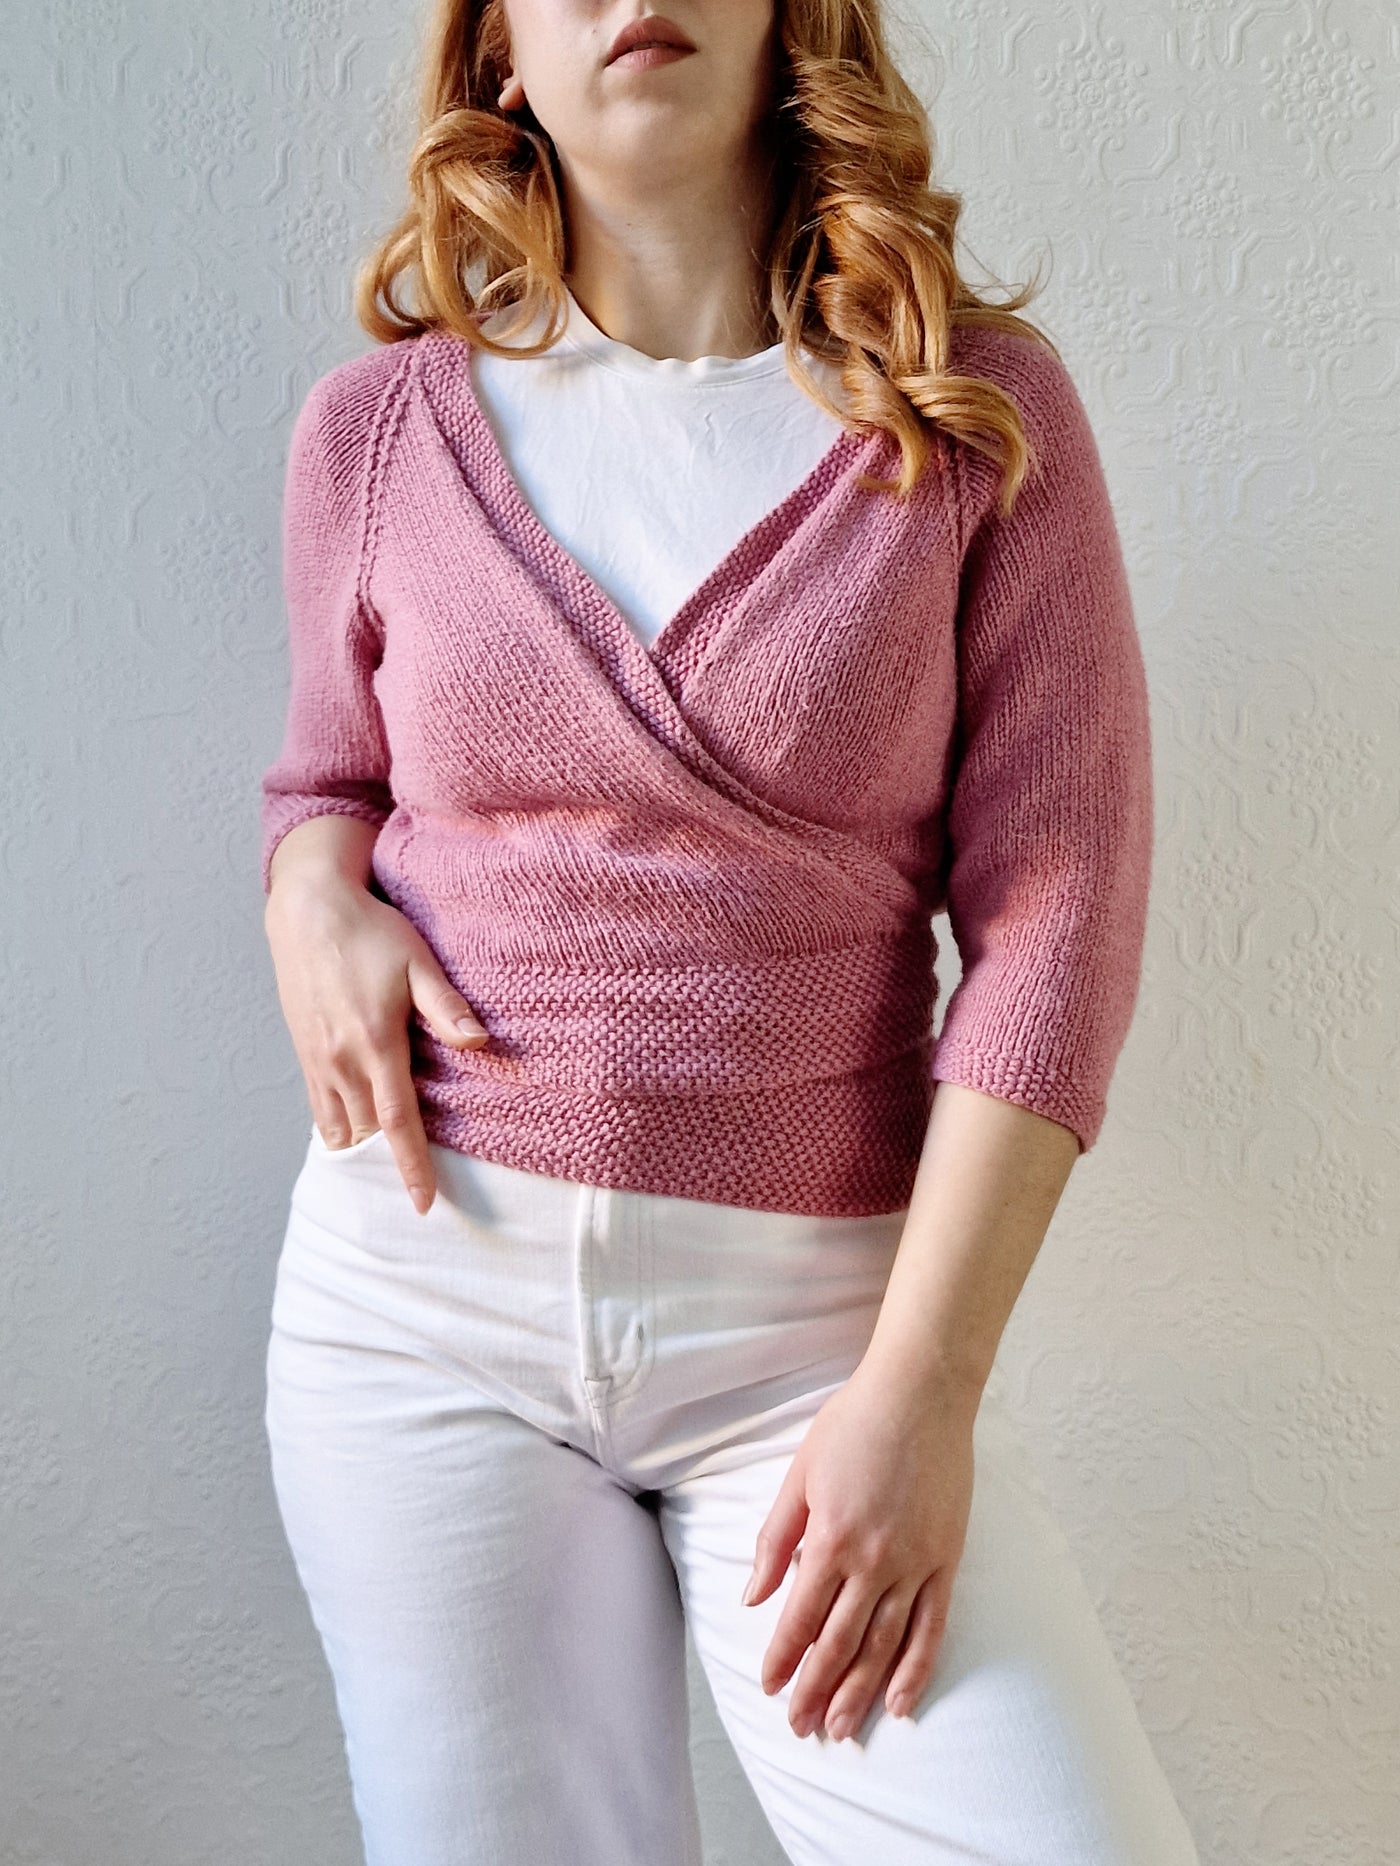 Vintage Knitted Mauve Pink Wrap Cardigan with 3/4 Sleeves - XS